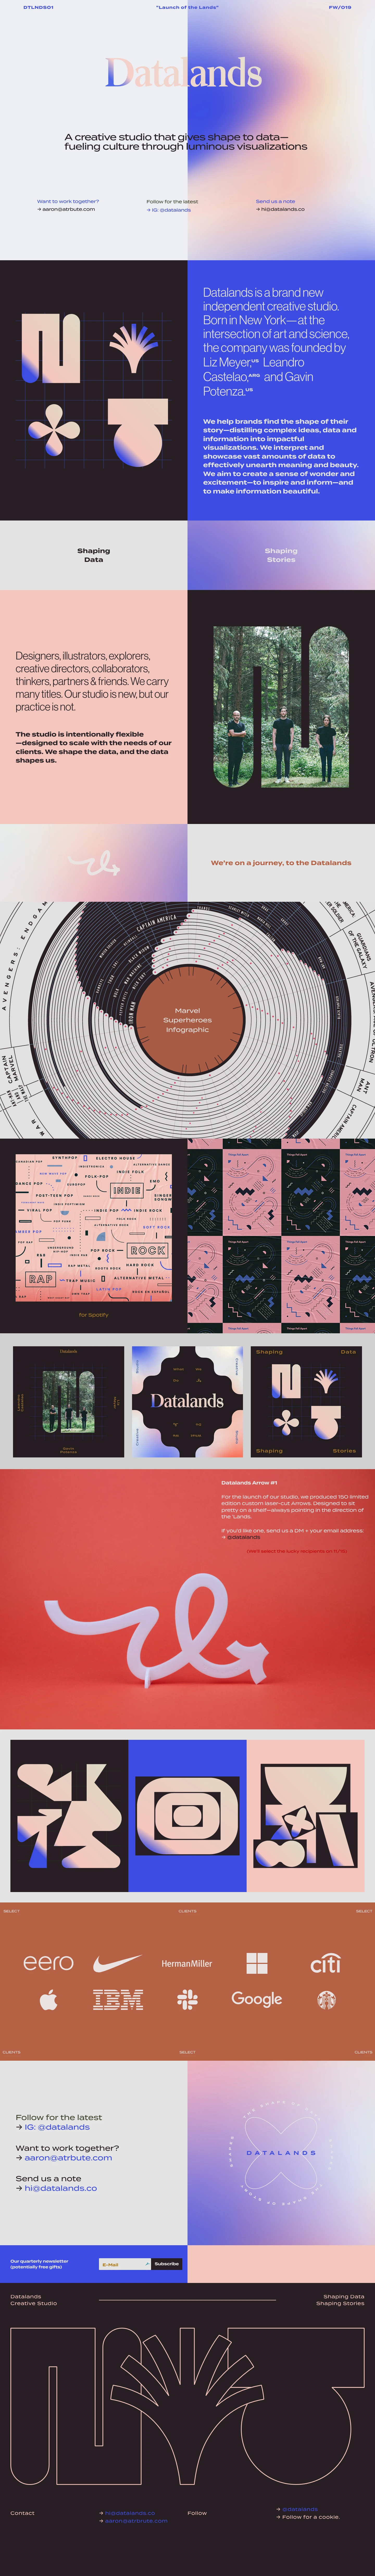 Datalands Landing Page Example: We are Datalands, an independent creative studio in NYC. Specializing in data visualization and infographics, we create clarity, pursue beauty and help brands find the shape of their story.